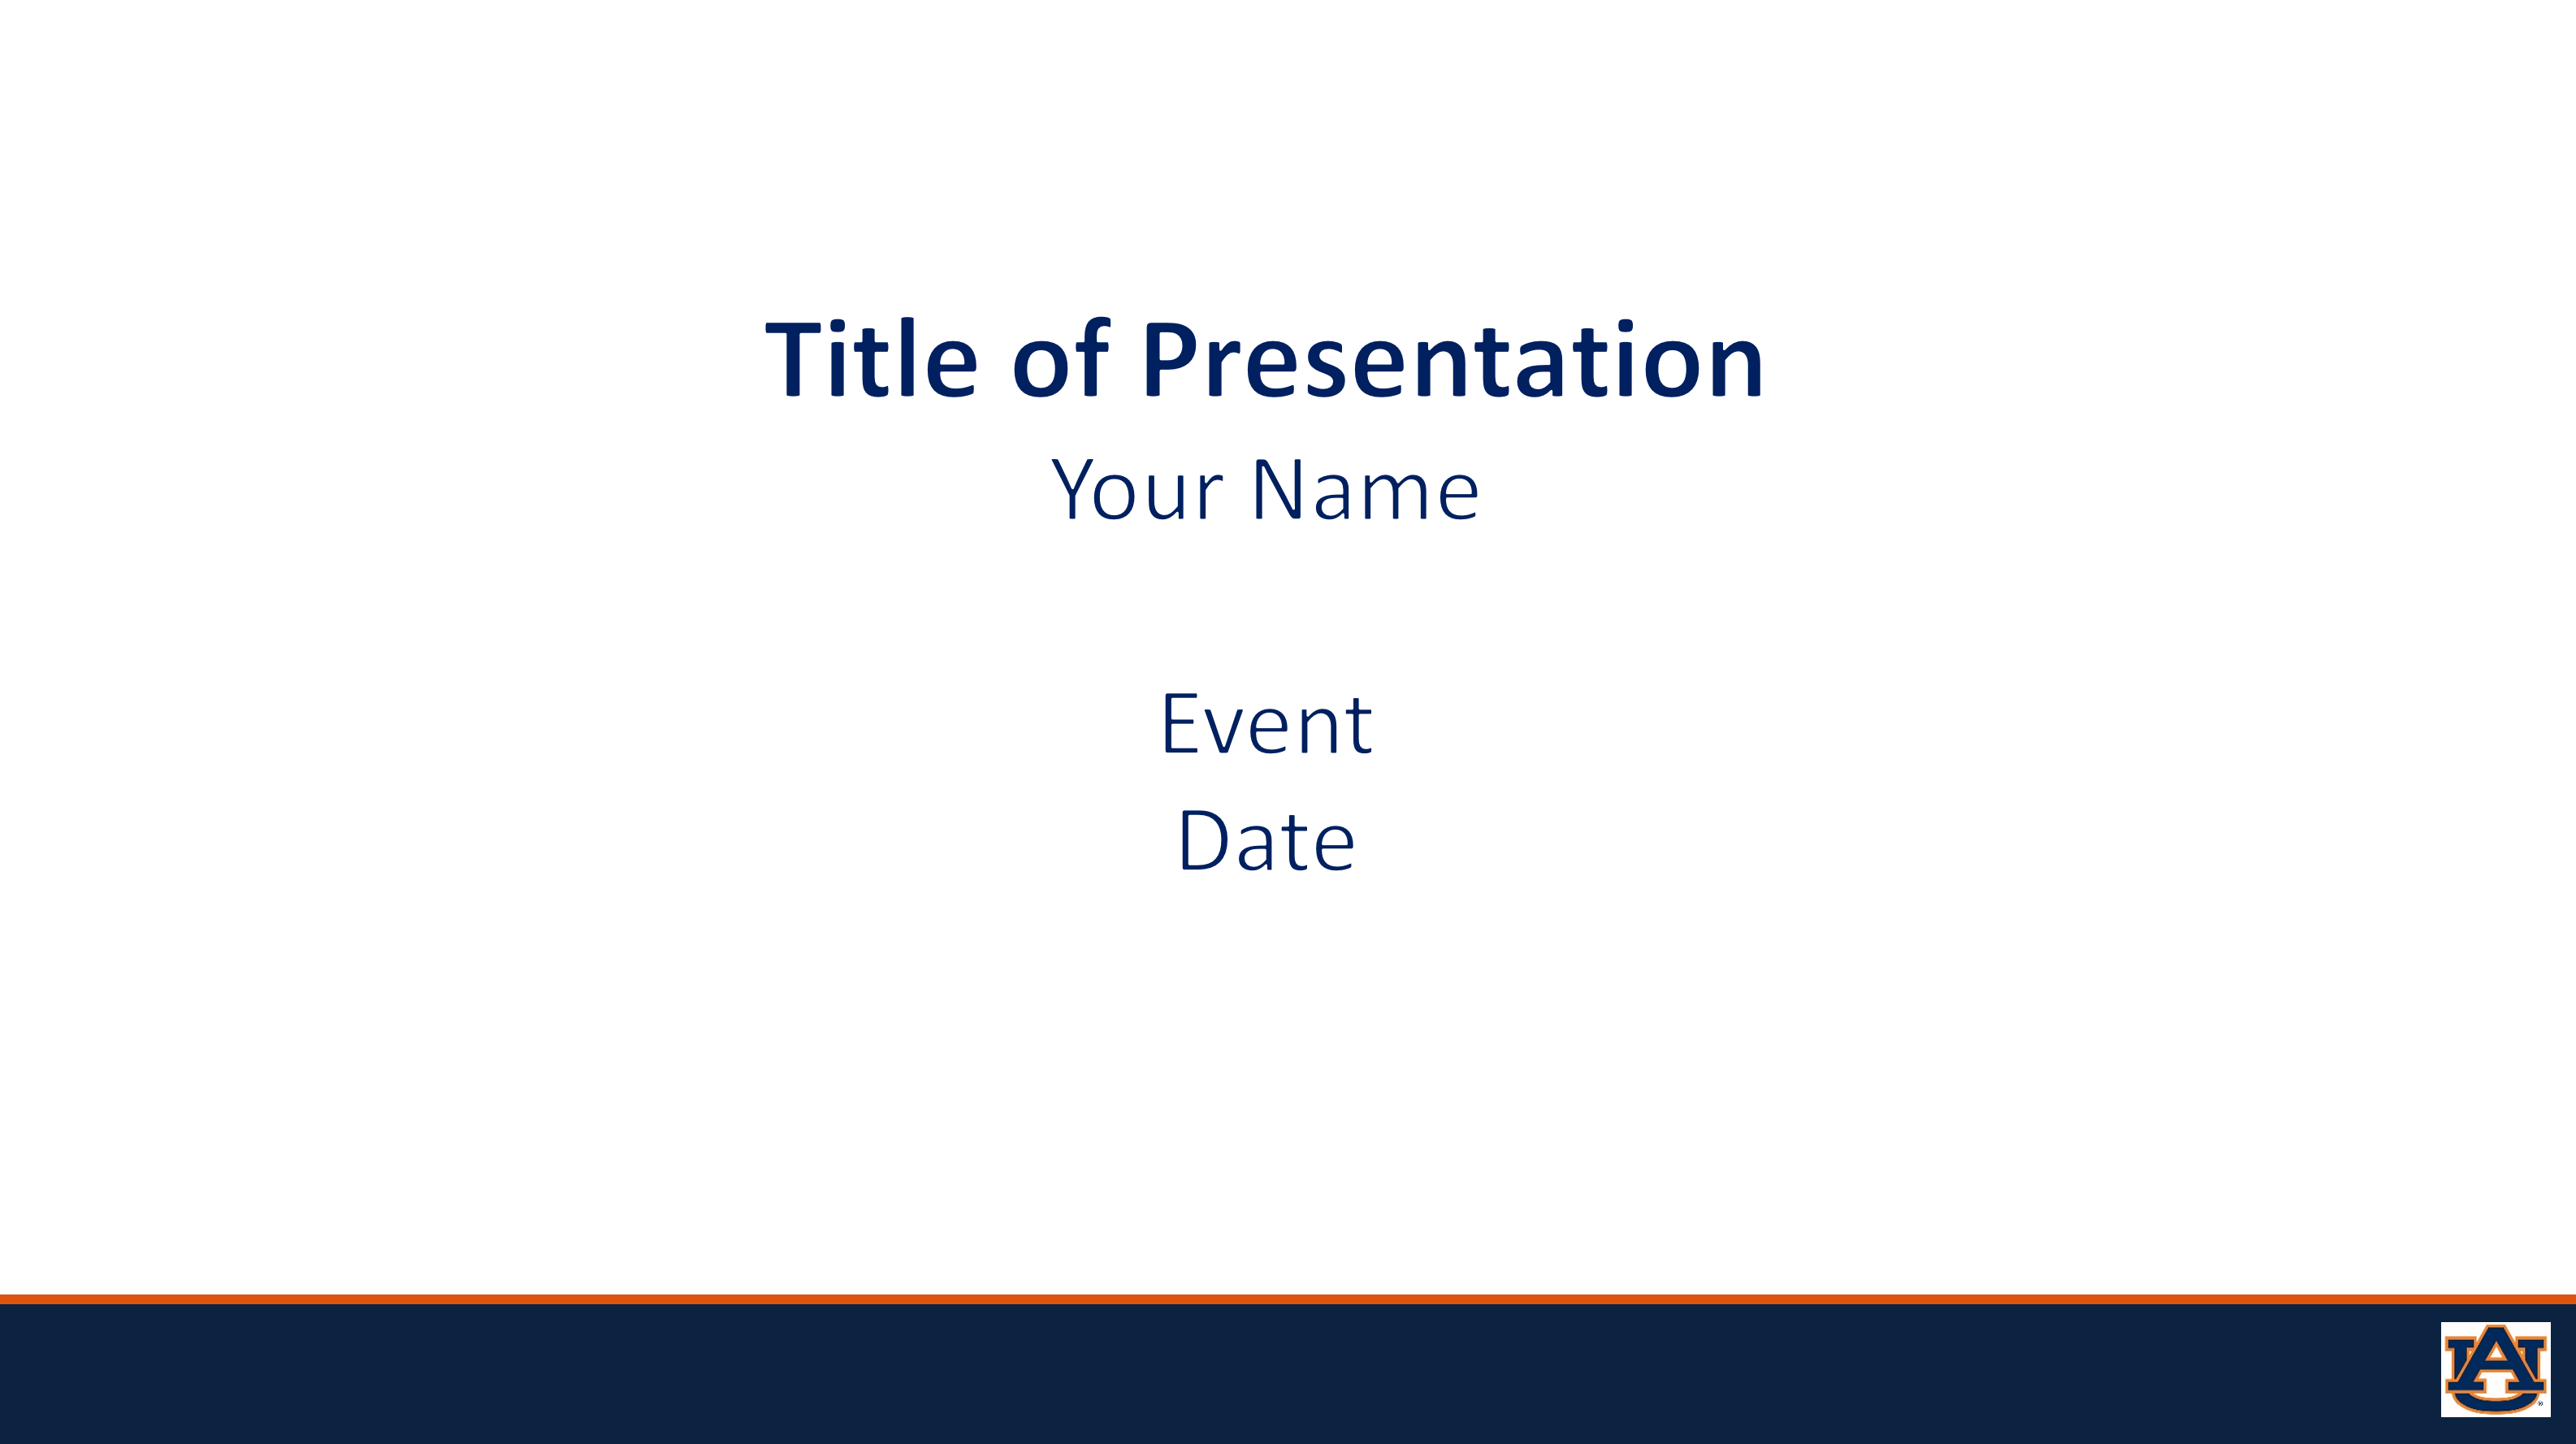 PowerPoint Template with Presentation Title and Name Goes Here